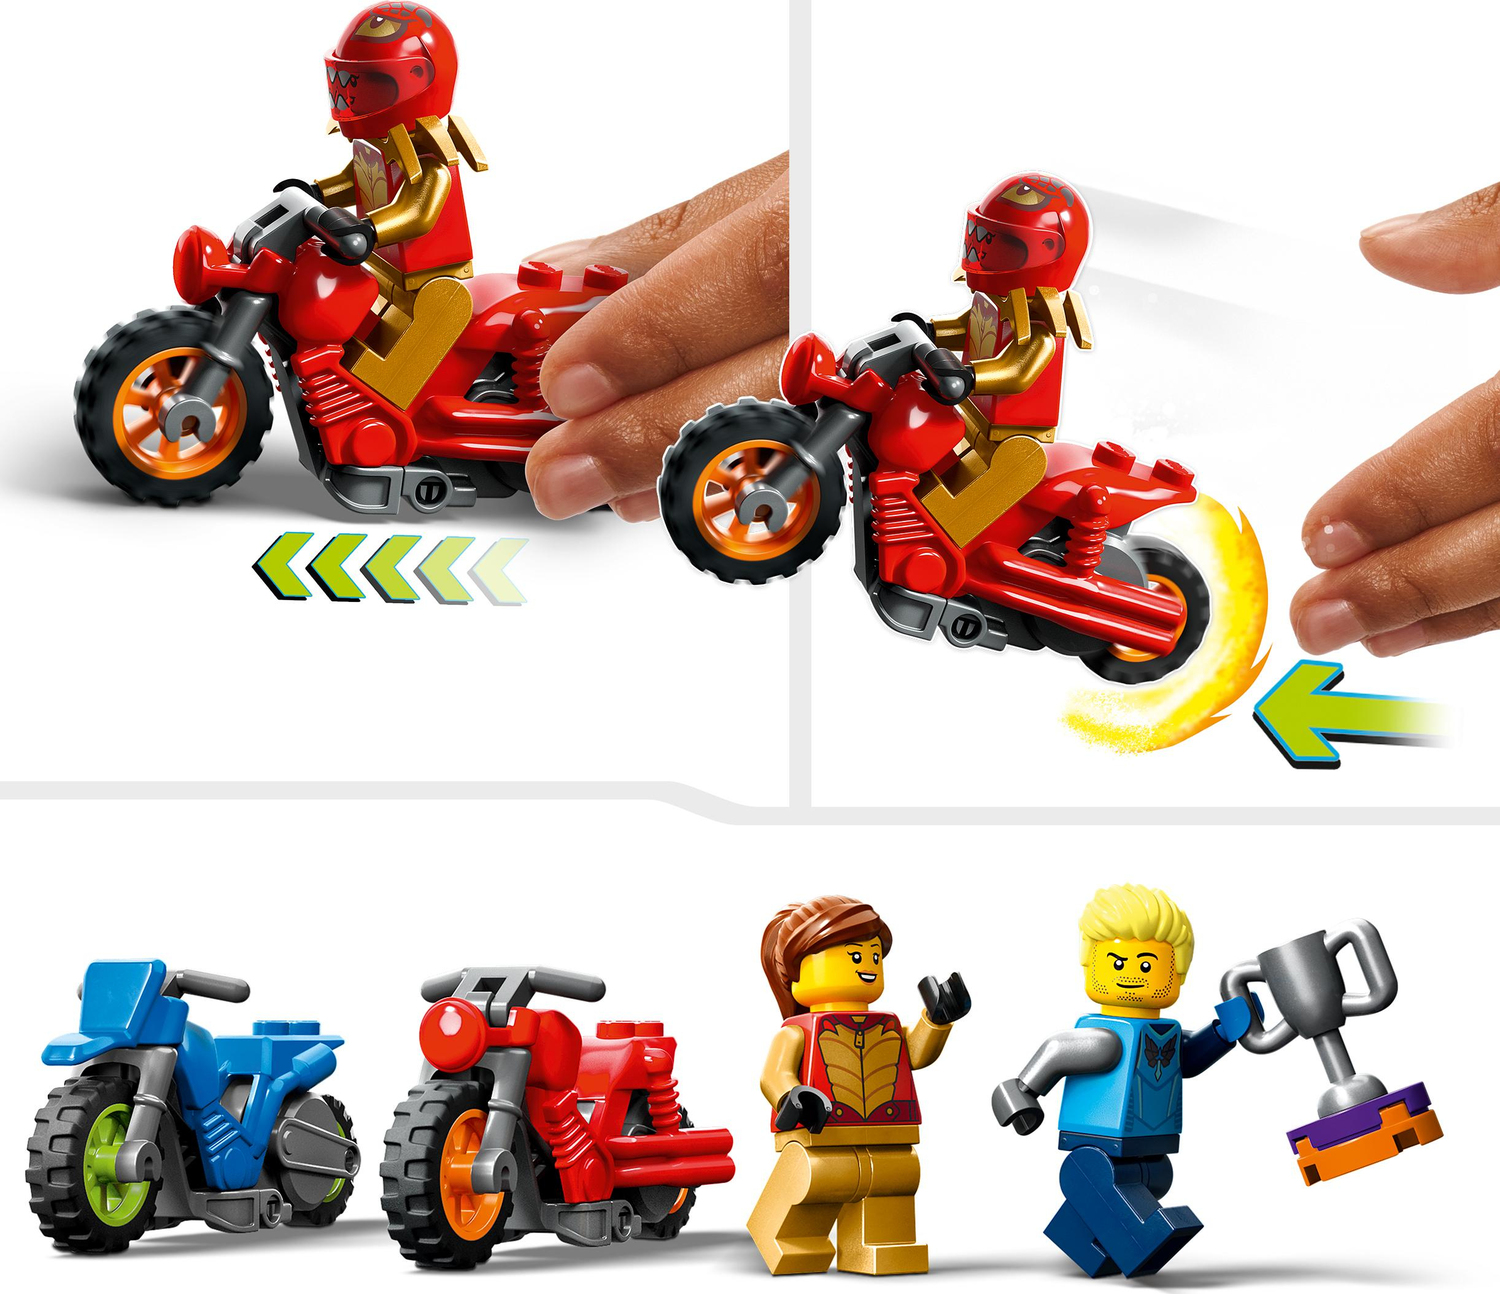 LEGO City Stuntz Spinning Stunt Challenge 60360 - 1 or 2 Player Tournaments  with Flywheel-Powered Motorcycle Toys, Features 2 Minifigures and Ramps,  Fun Gift Set Idea for Boys, Girls, or Kids Ages 6+ 